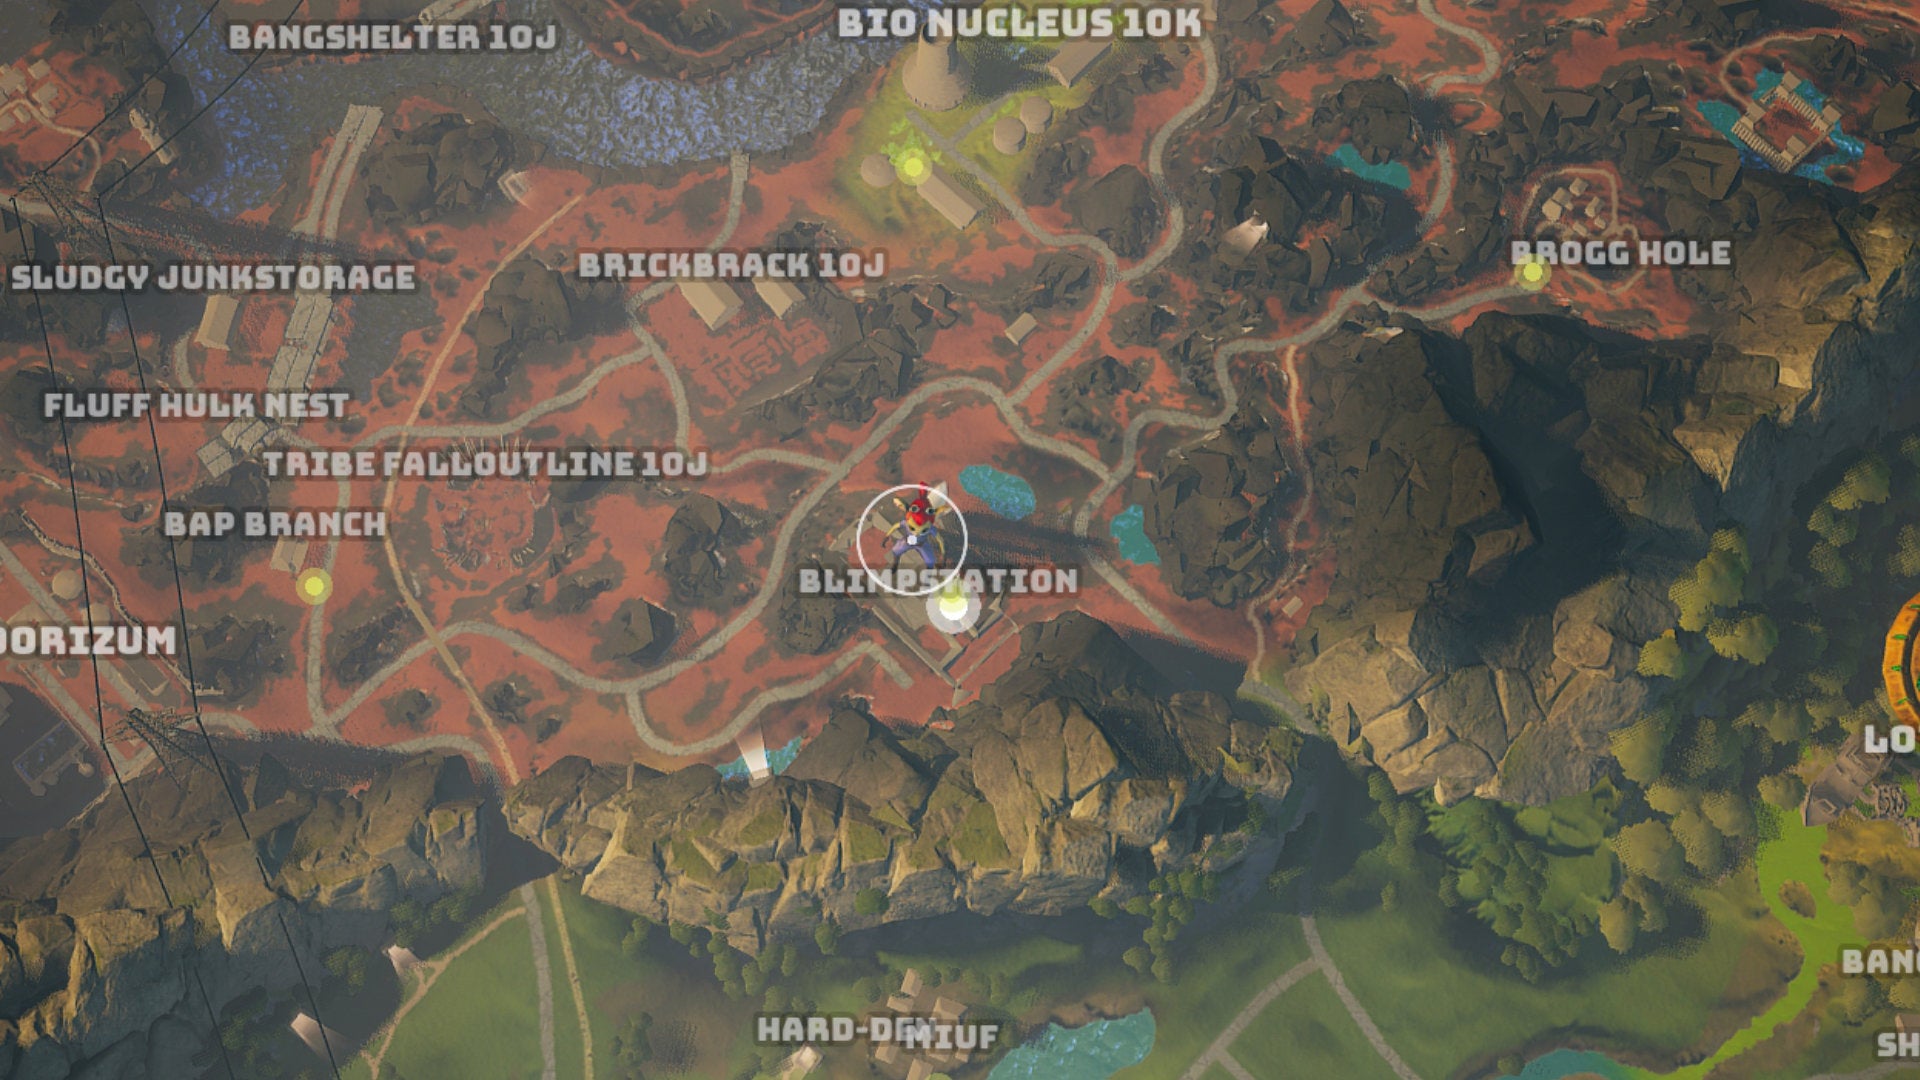 A screenshot of part of the Biomutant map, with the Blimpstation where Lobo resides highlighted.